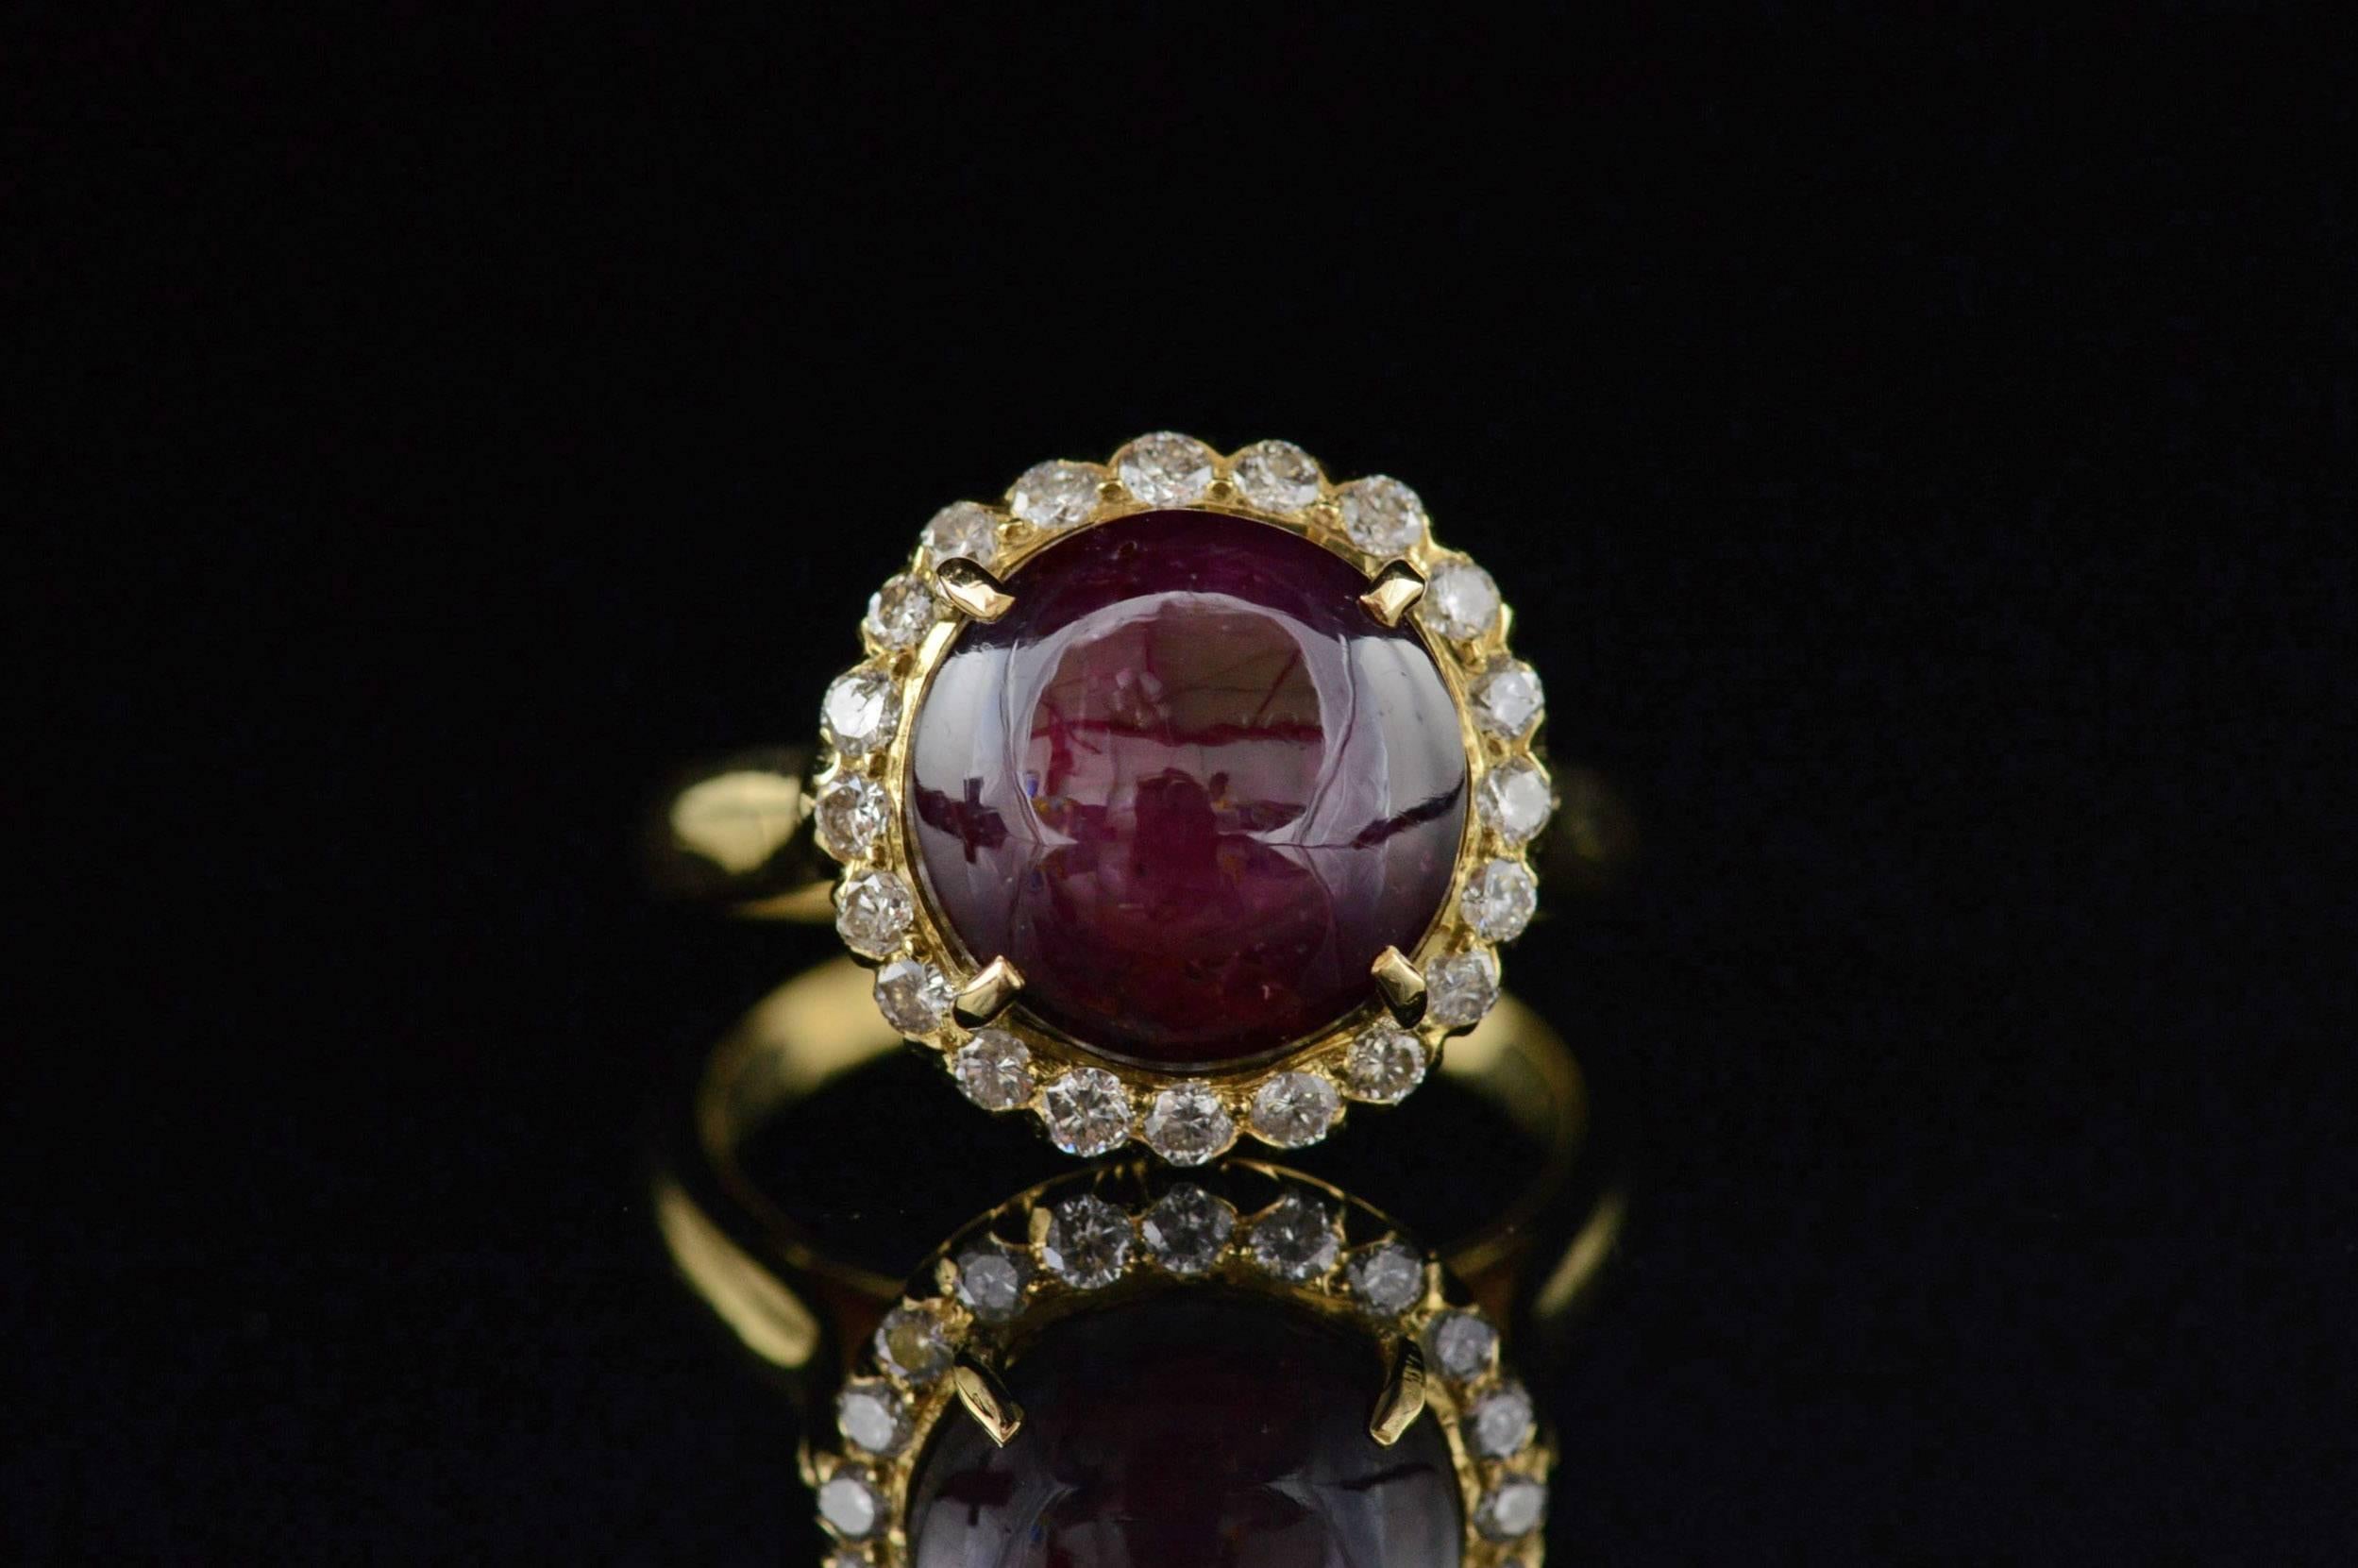 All diamonds are graded according to GIA grading standards. (When applicable)

·Item: 18K 3.43 Ctw Cat's Eye Ruby & Diamond Halo Ring Size 5.25 Yellow Gold

·Era: 1980s

·Composition: 18k Gold Marked/Tested

·Center Gem Stone: 3.10Ct Chatoyancy